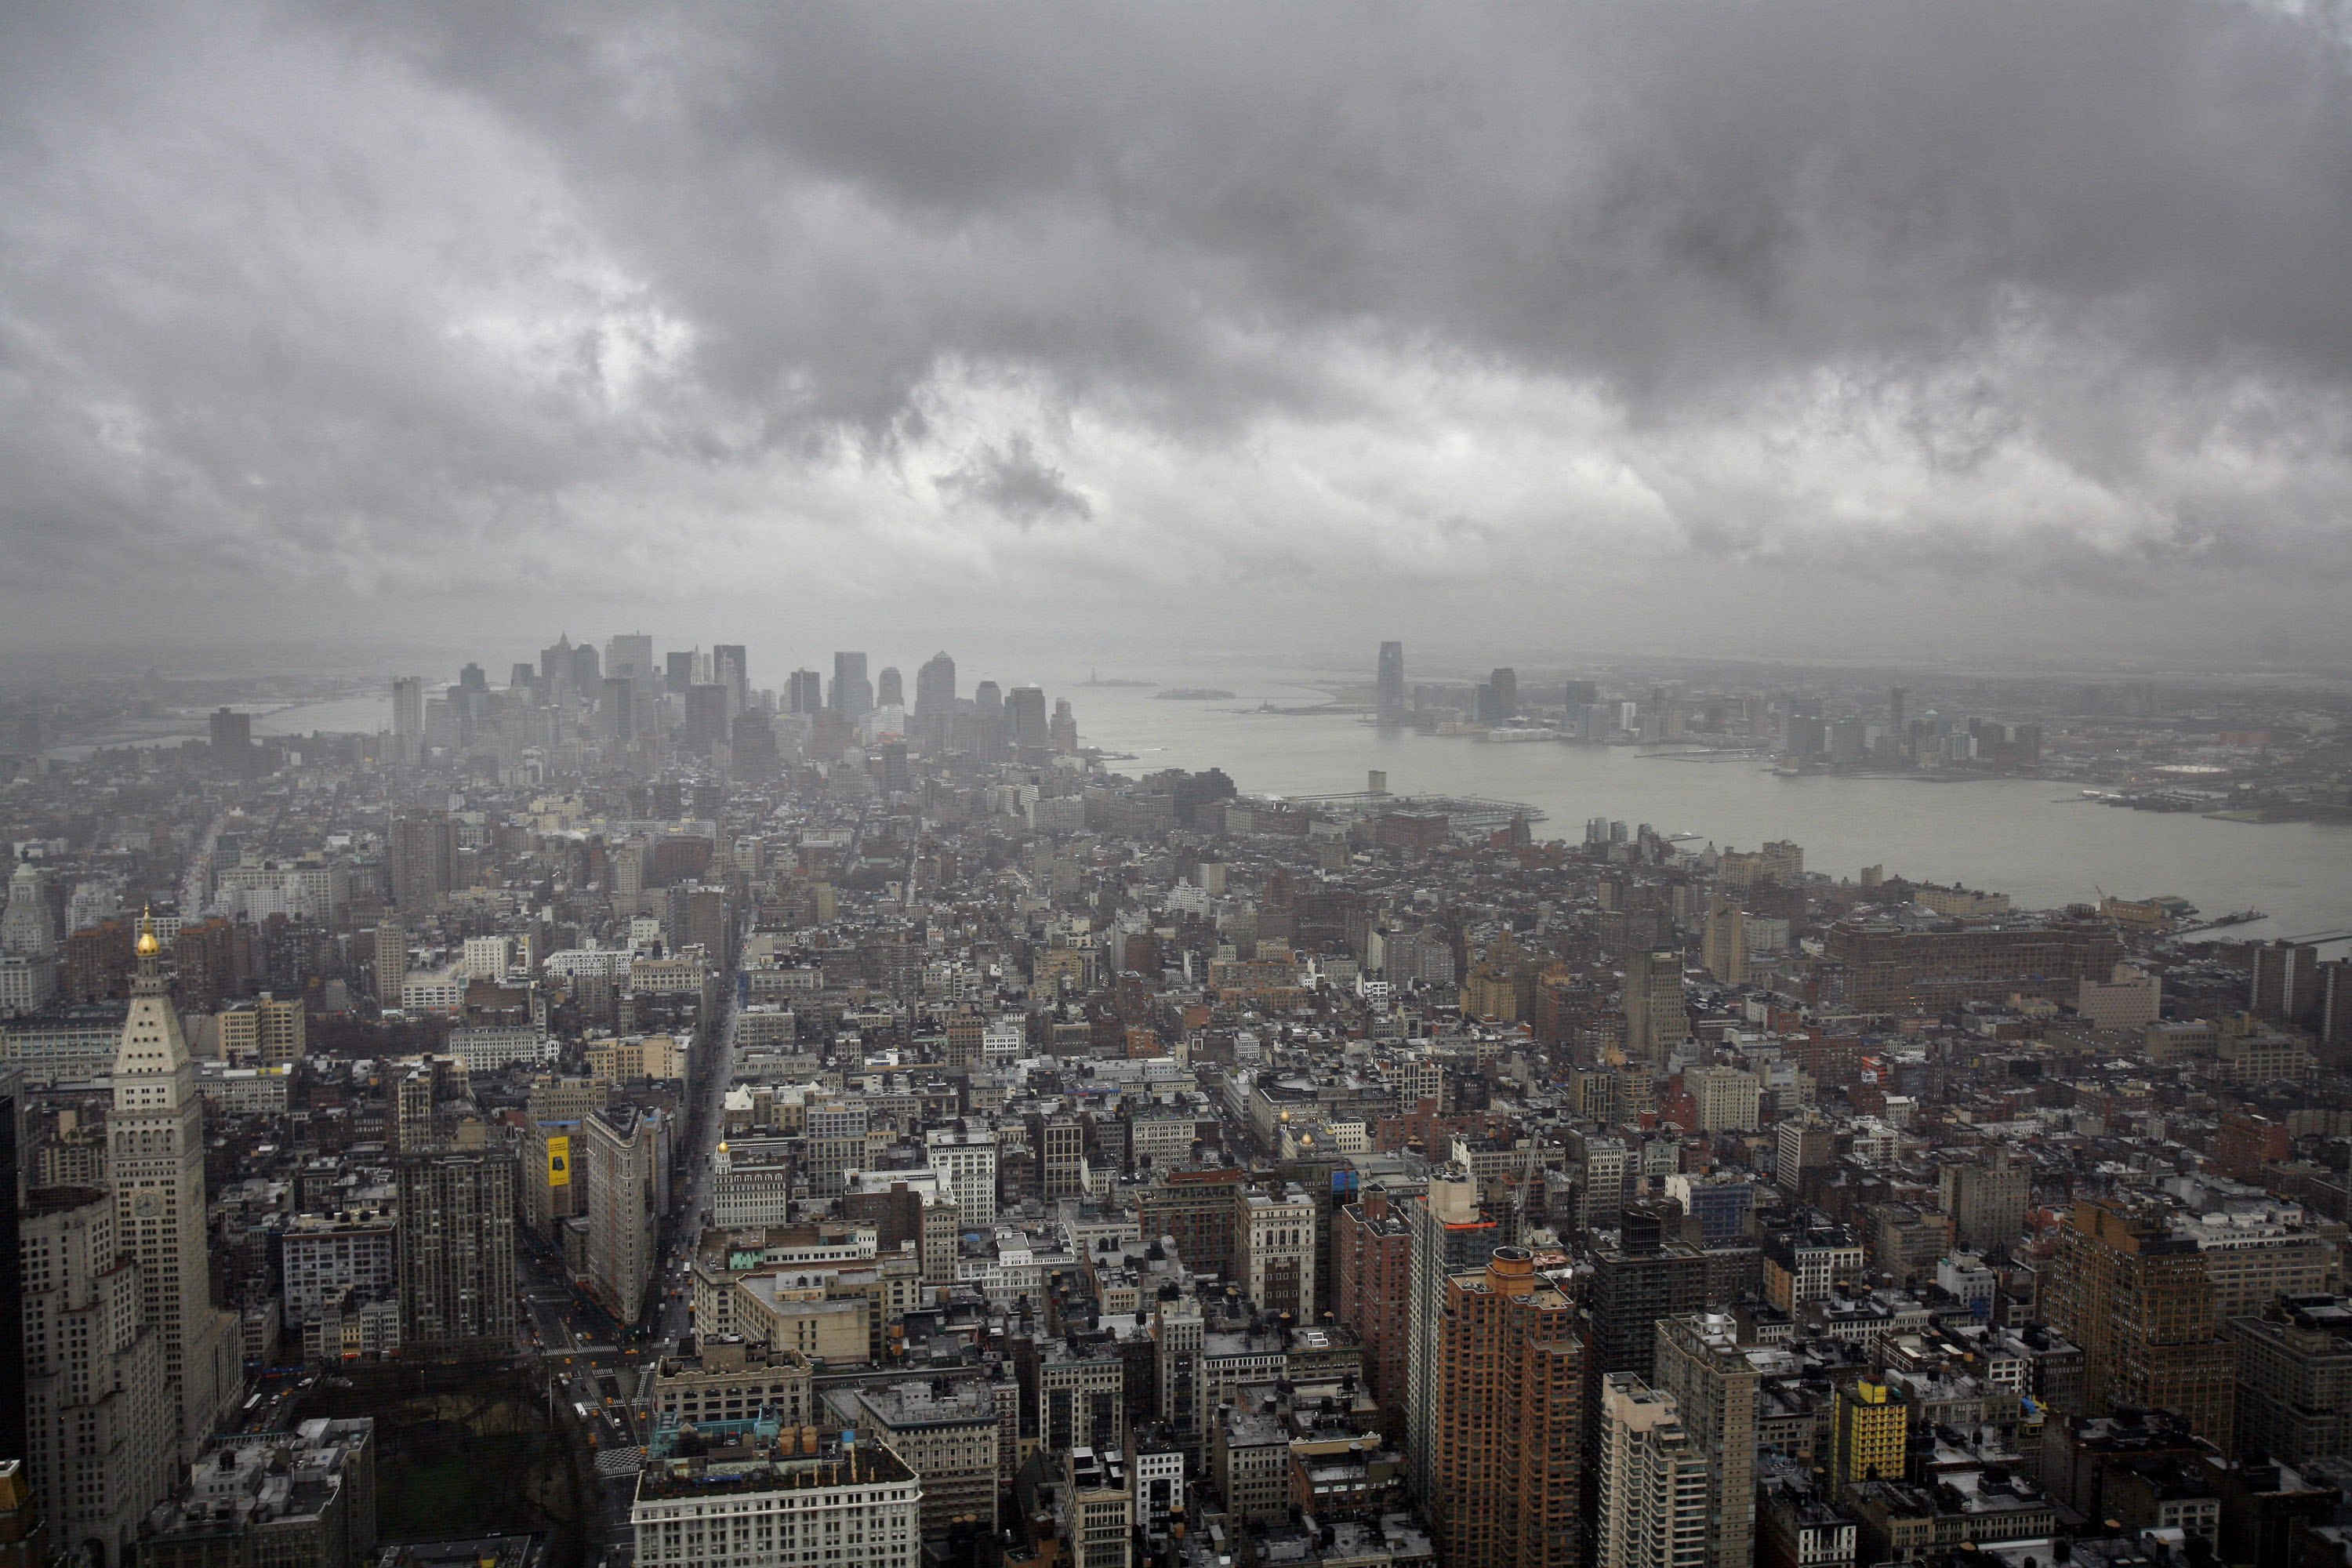 A photo of storm clouds gathering over New York and New Jersey